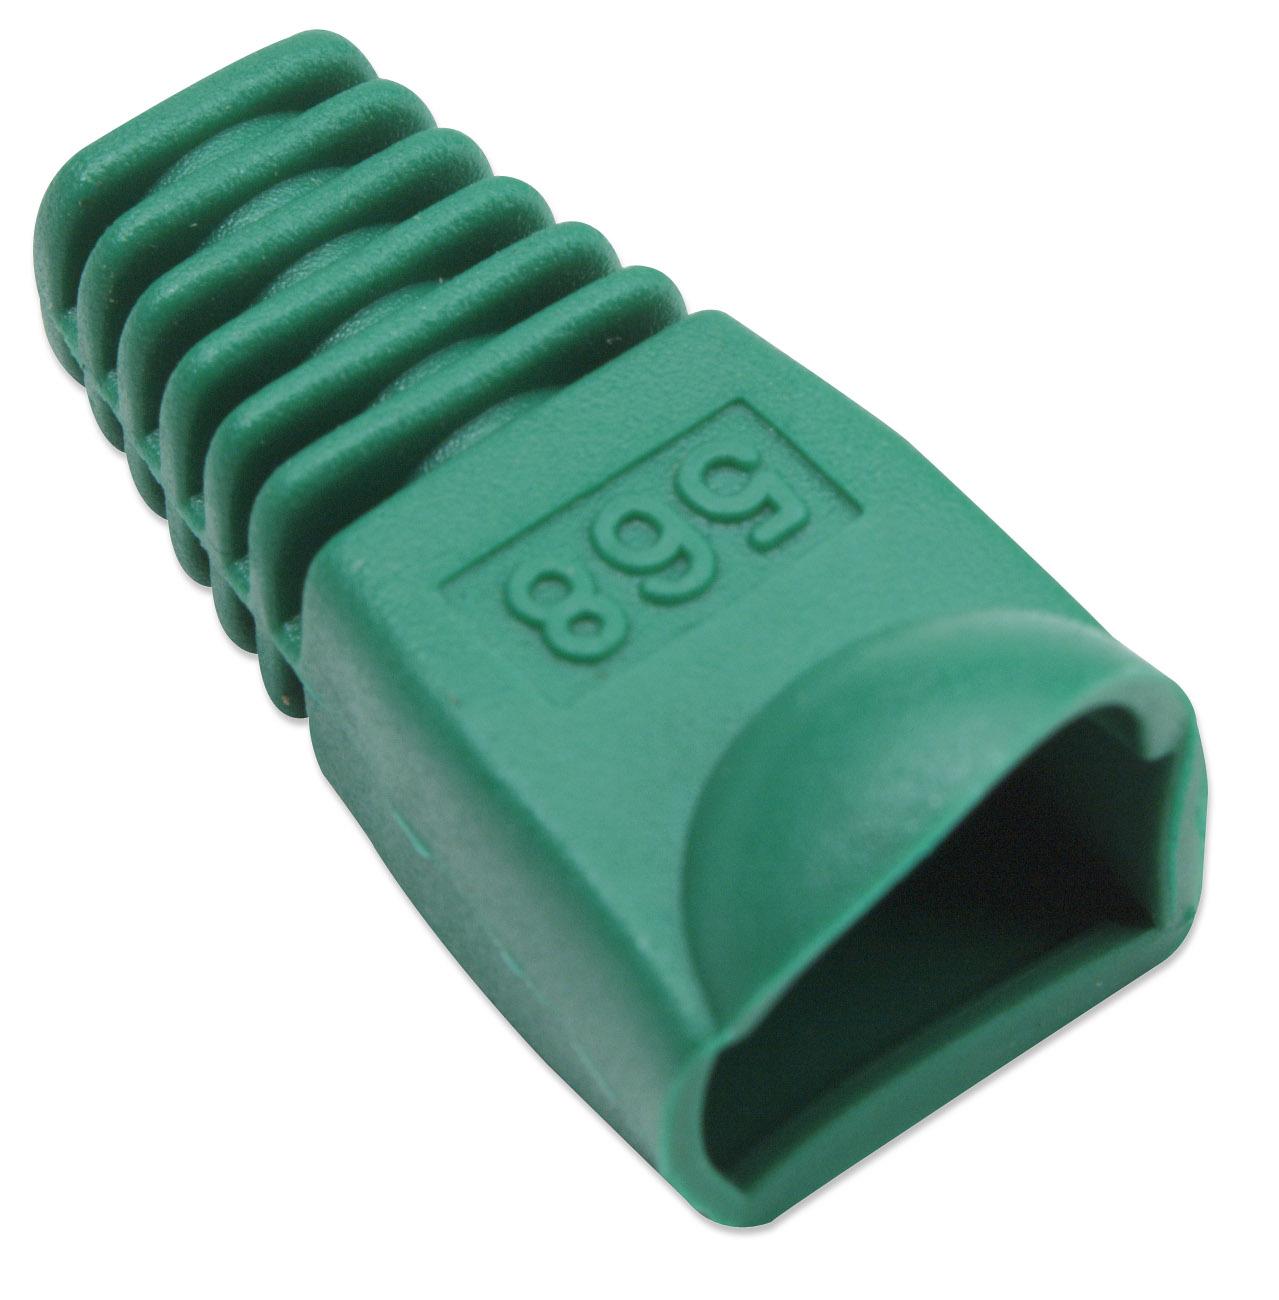 Connector cover for RJ45 6.2mm Green plug 08619 Intellinet